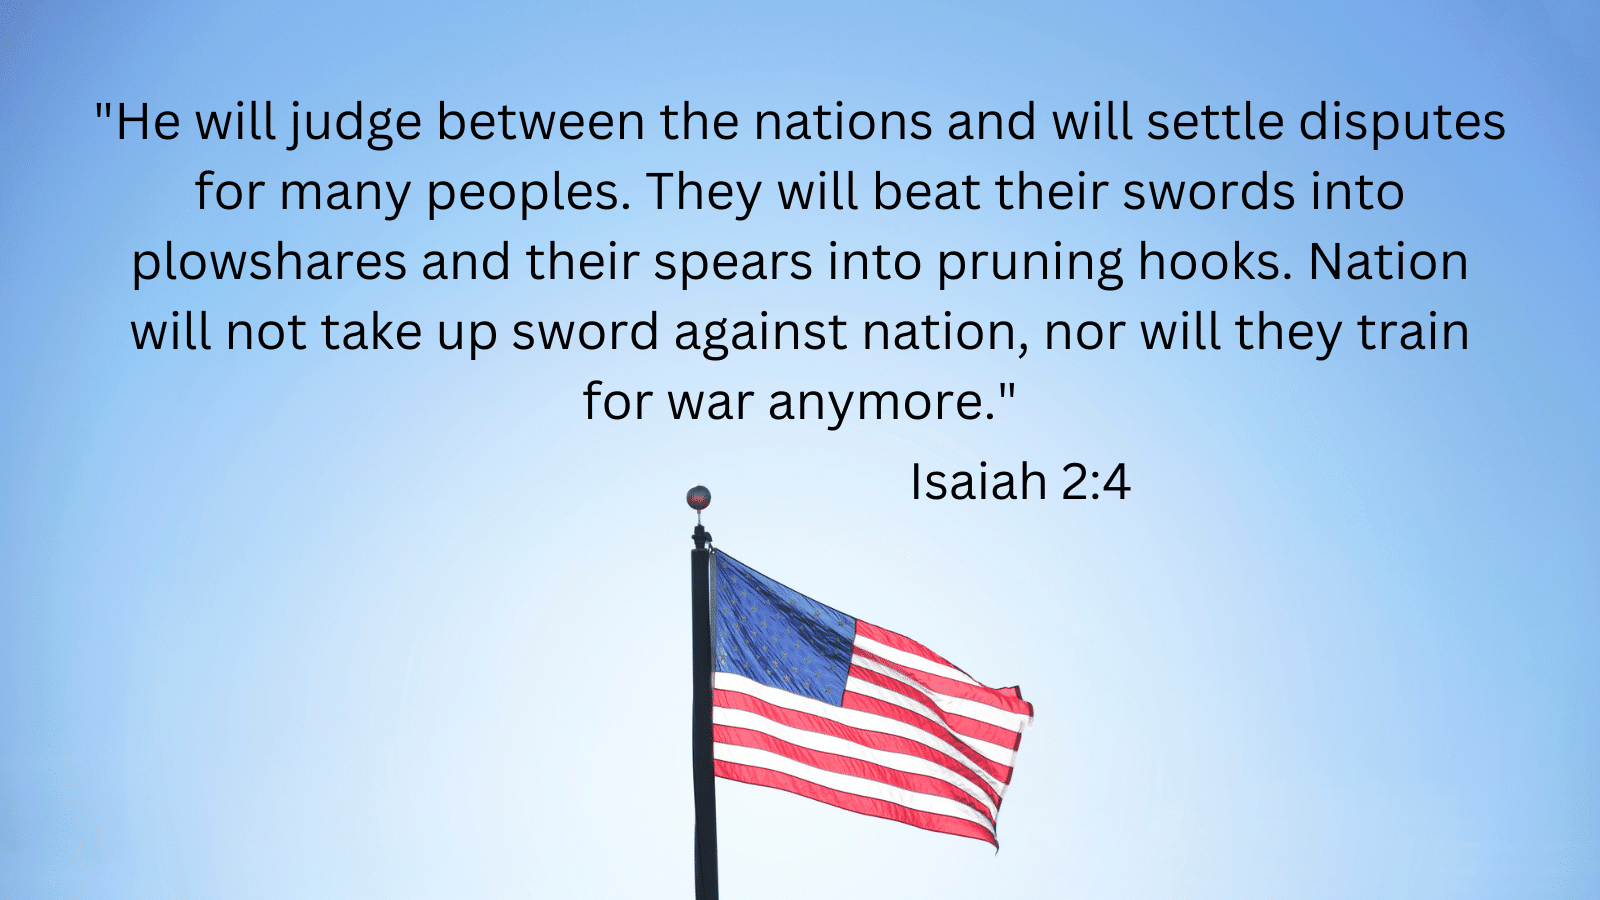 American Flag outside with Isaiah 2:4